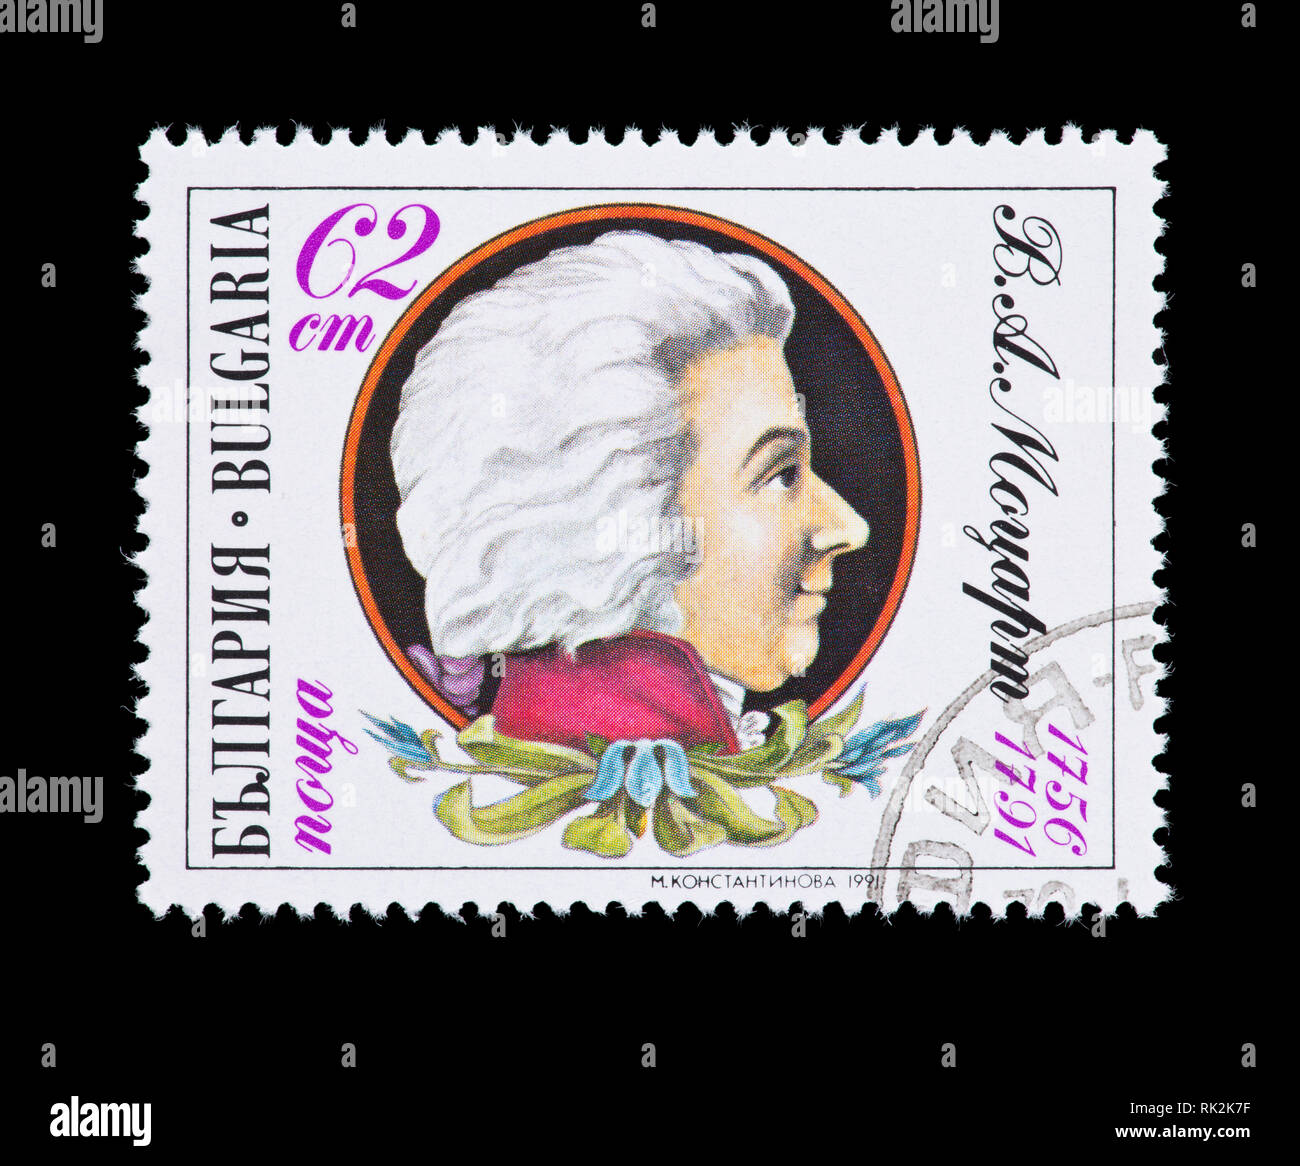 Postage stamp from Bulgaria depicting Wolfgang Amadeus Mozart Stock Photo